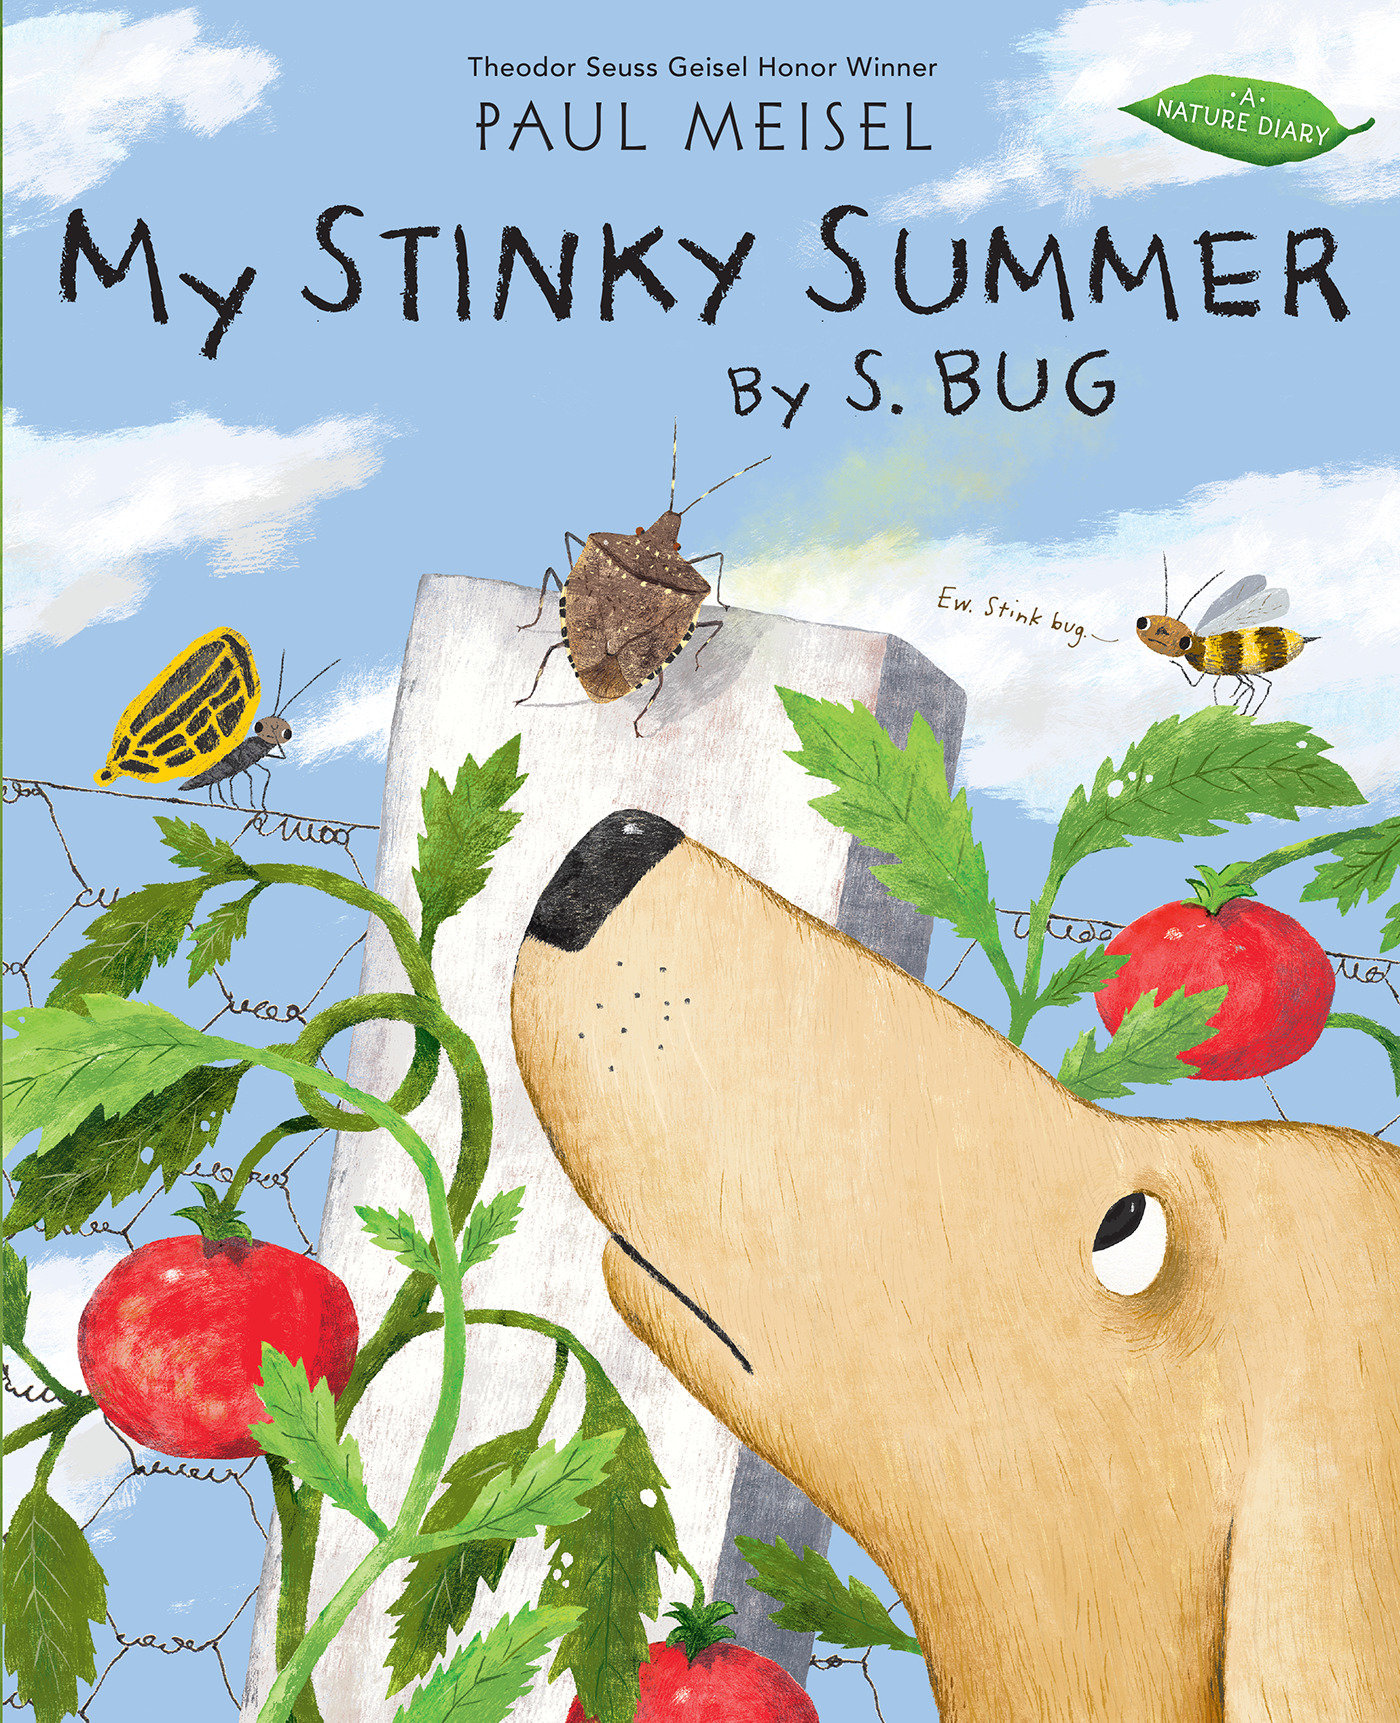 My Stinky Summer By S. Bug (Hardcover Book)